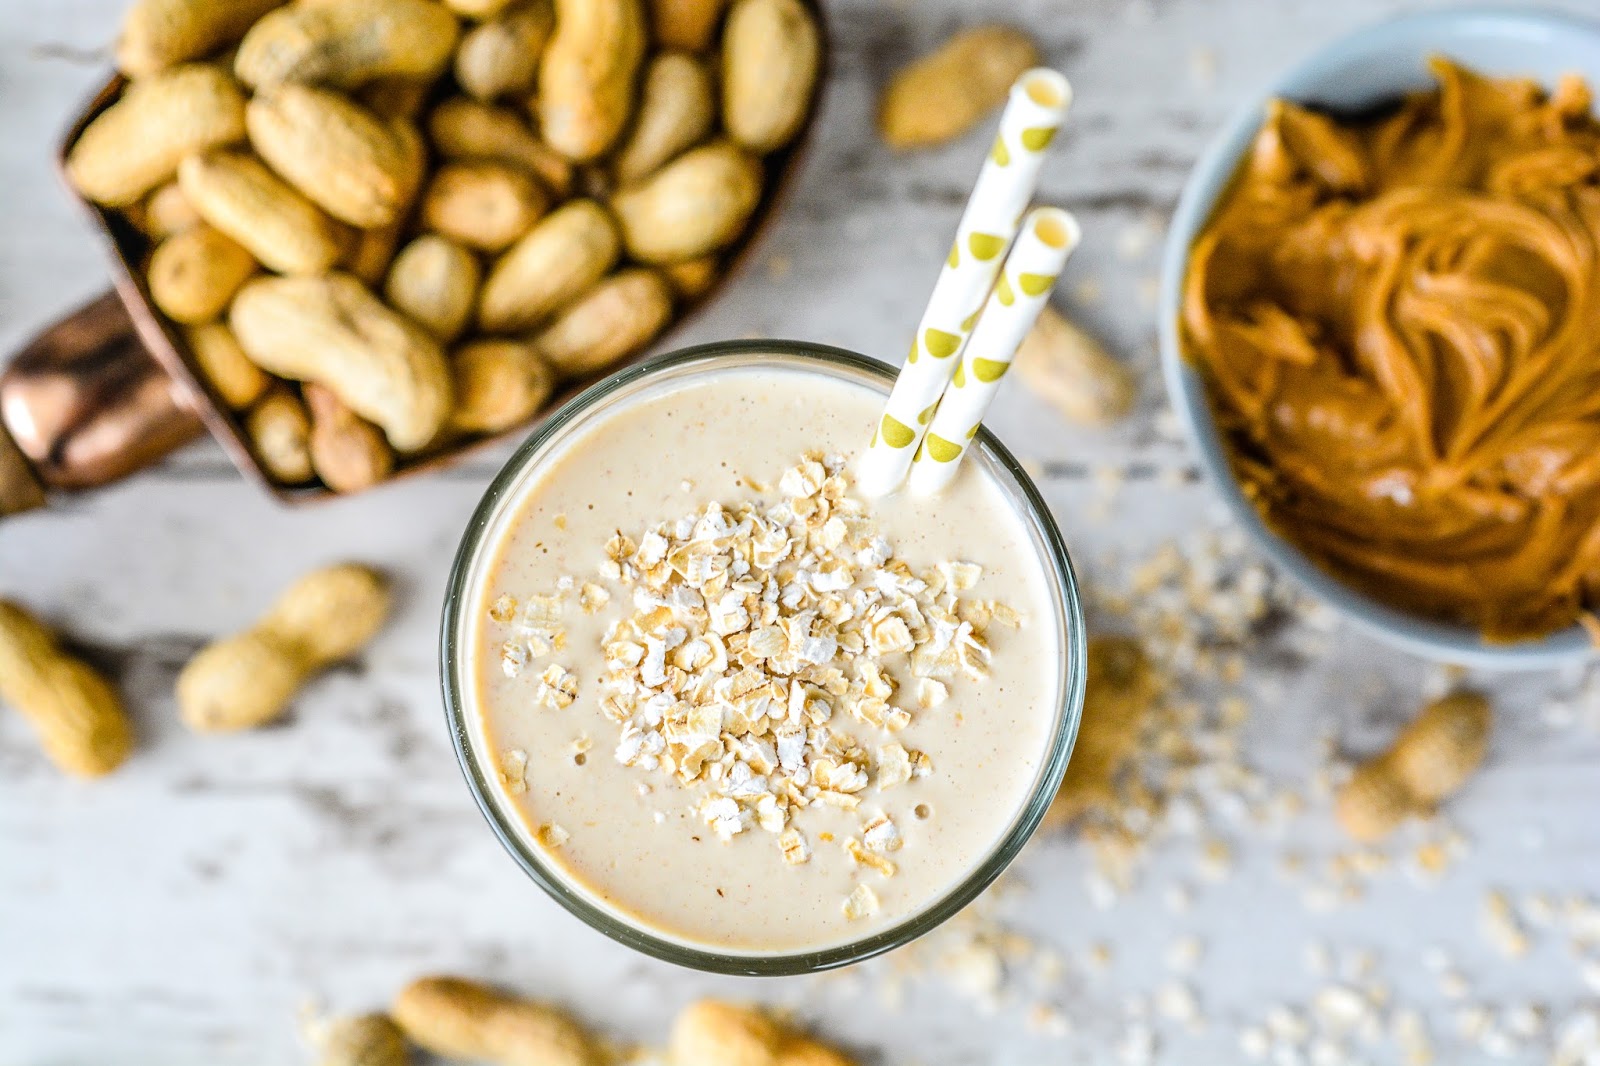 Peanut Butter and Oats Smoothie